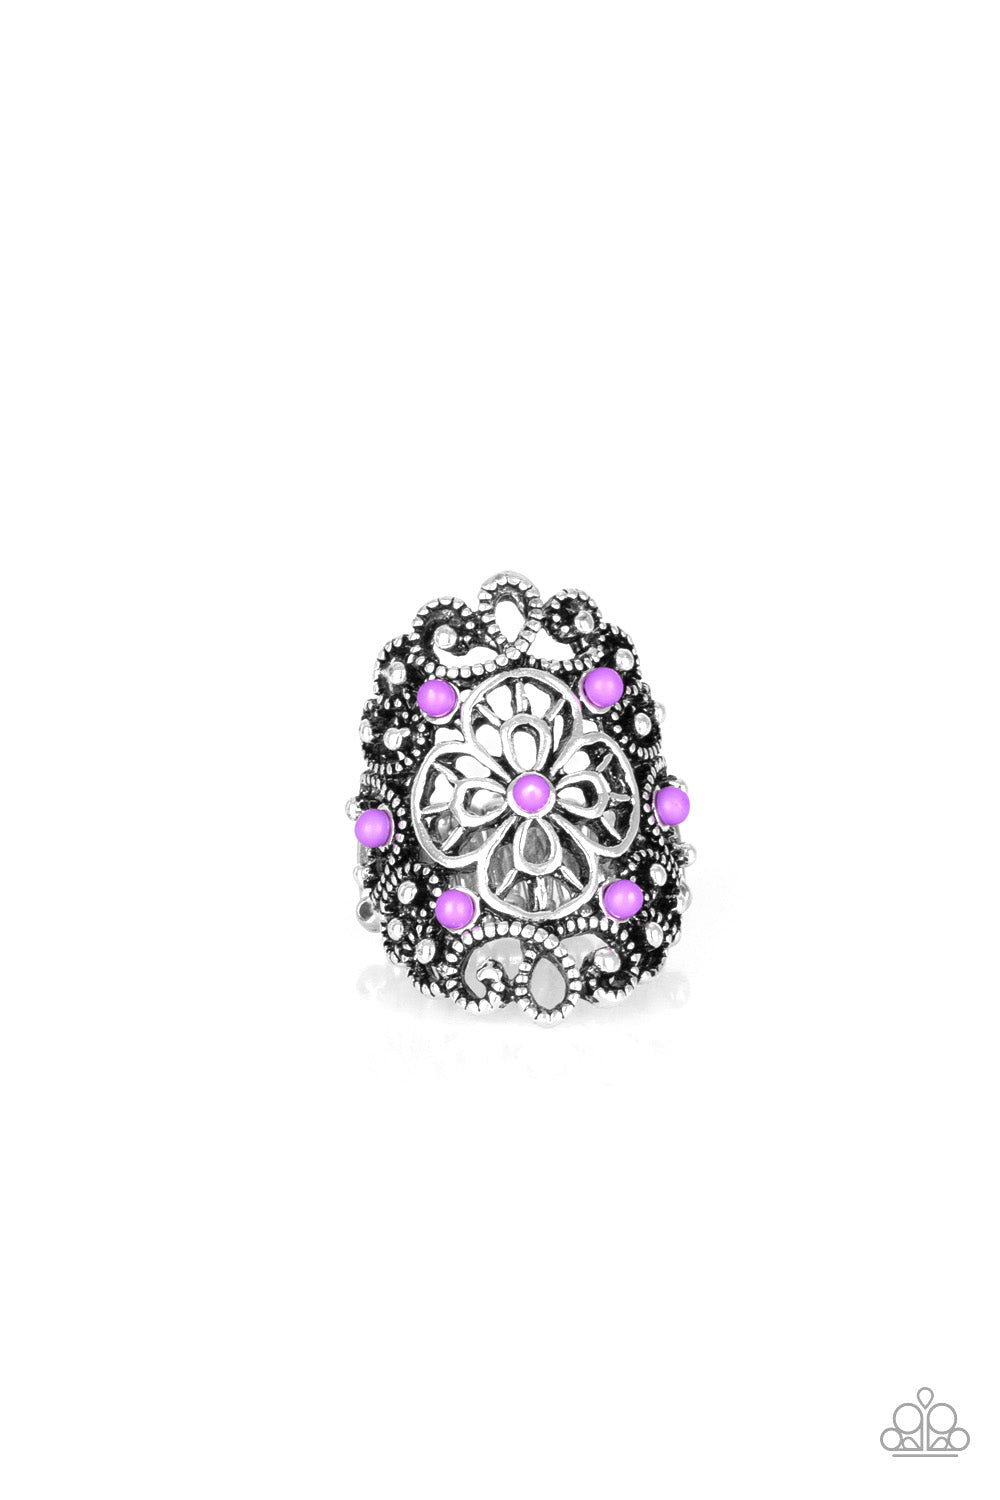 Floral Fancies - Purple - Silver Floral Ring - Paparazzi Accessories - Purple beads are sprinkled across a shimmery frame swirling with silver filigree, creating a whimsical floral frame atop the finger. Features a stretchy band for a flexible fit. Sold as one individual stylish ring.